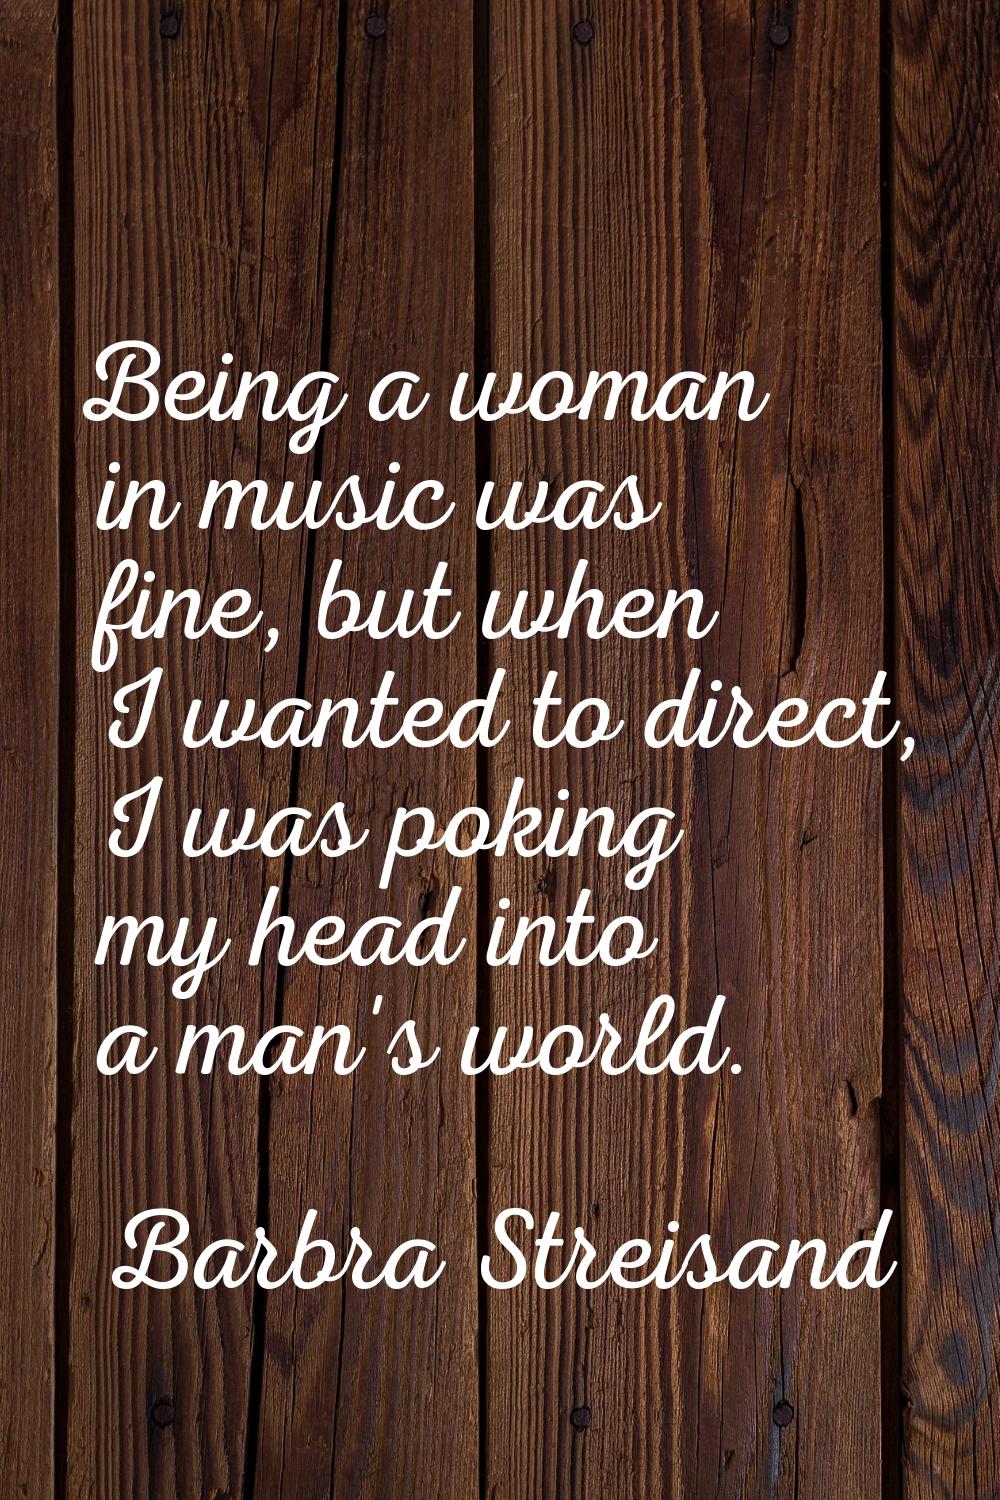 Being a woman in music was fine, but when I wanted to direct, I was poking my head into a man's wor